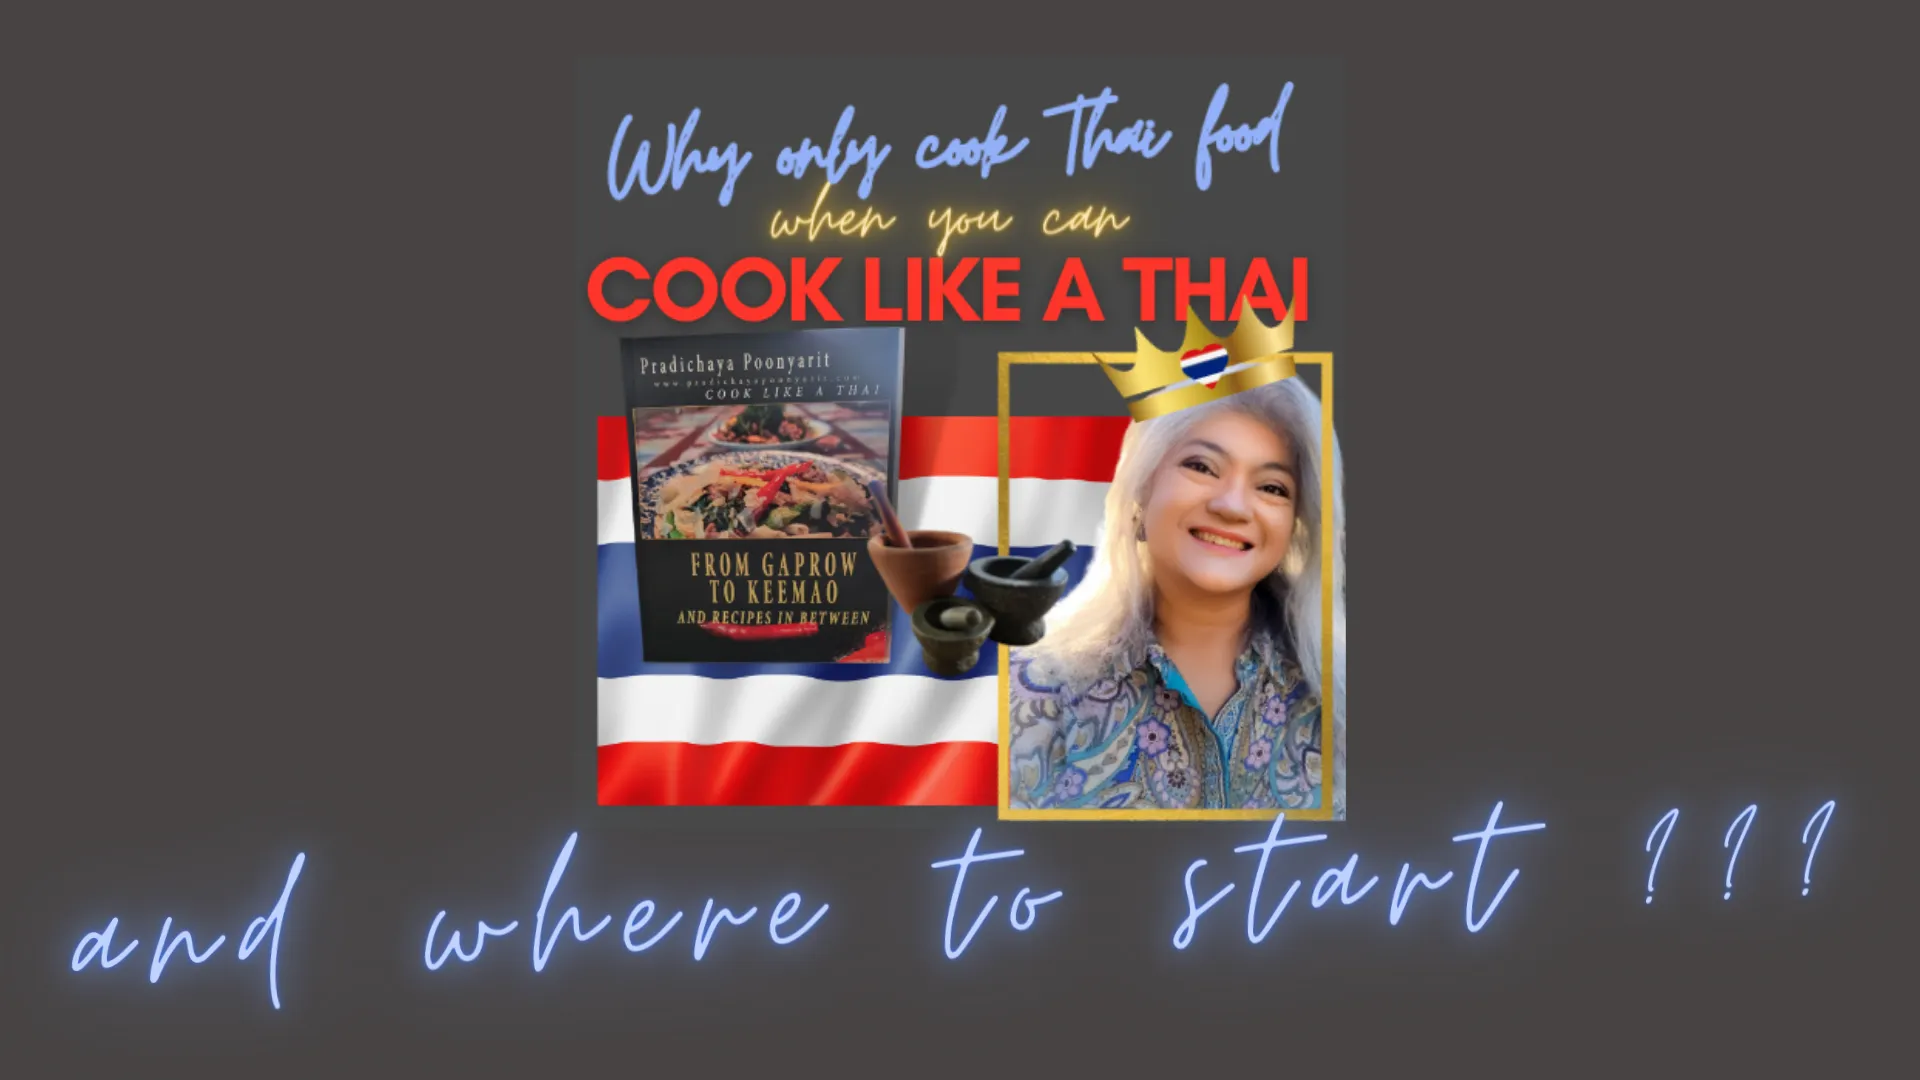 FROM GAPROW TO KEEMAO AND RECIPES IN BETWEEN | Cook Like A Thai by Pradichaya Poonyarit